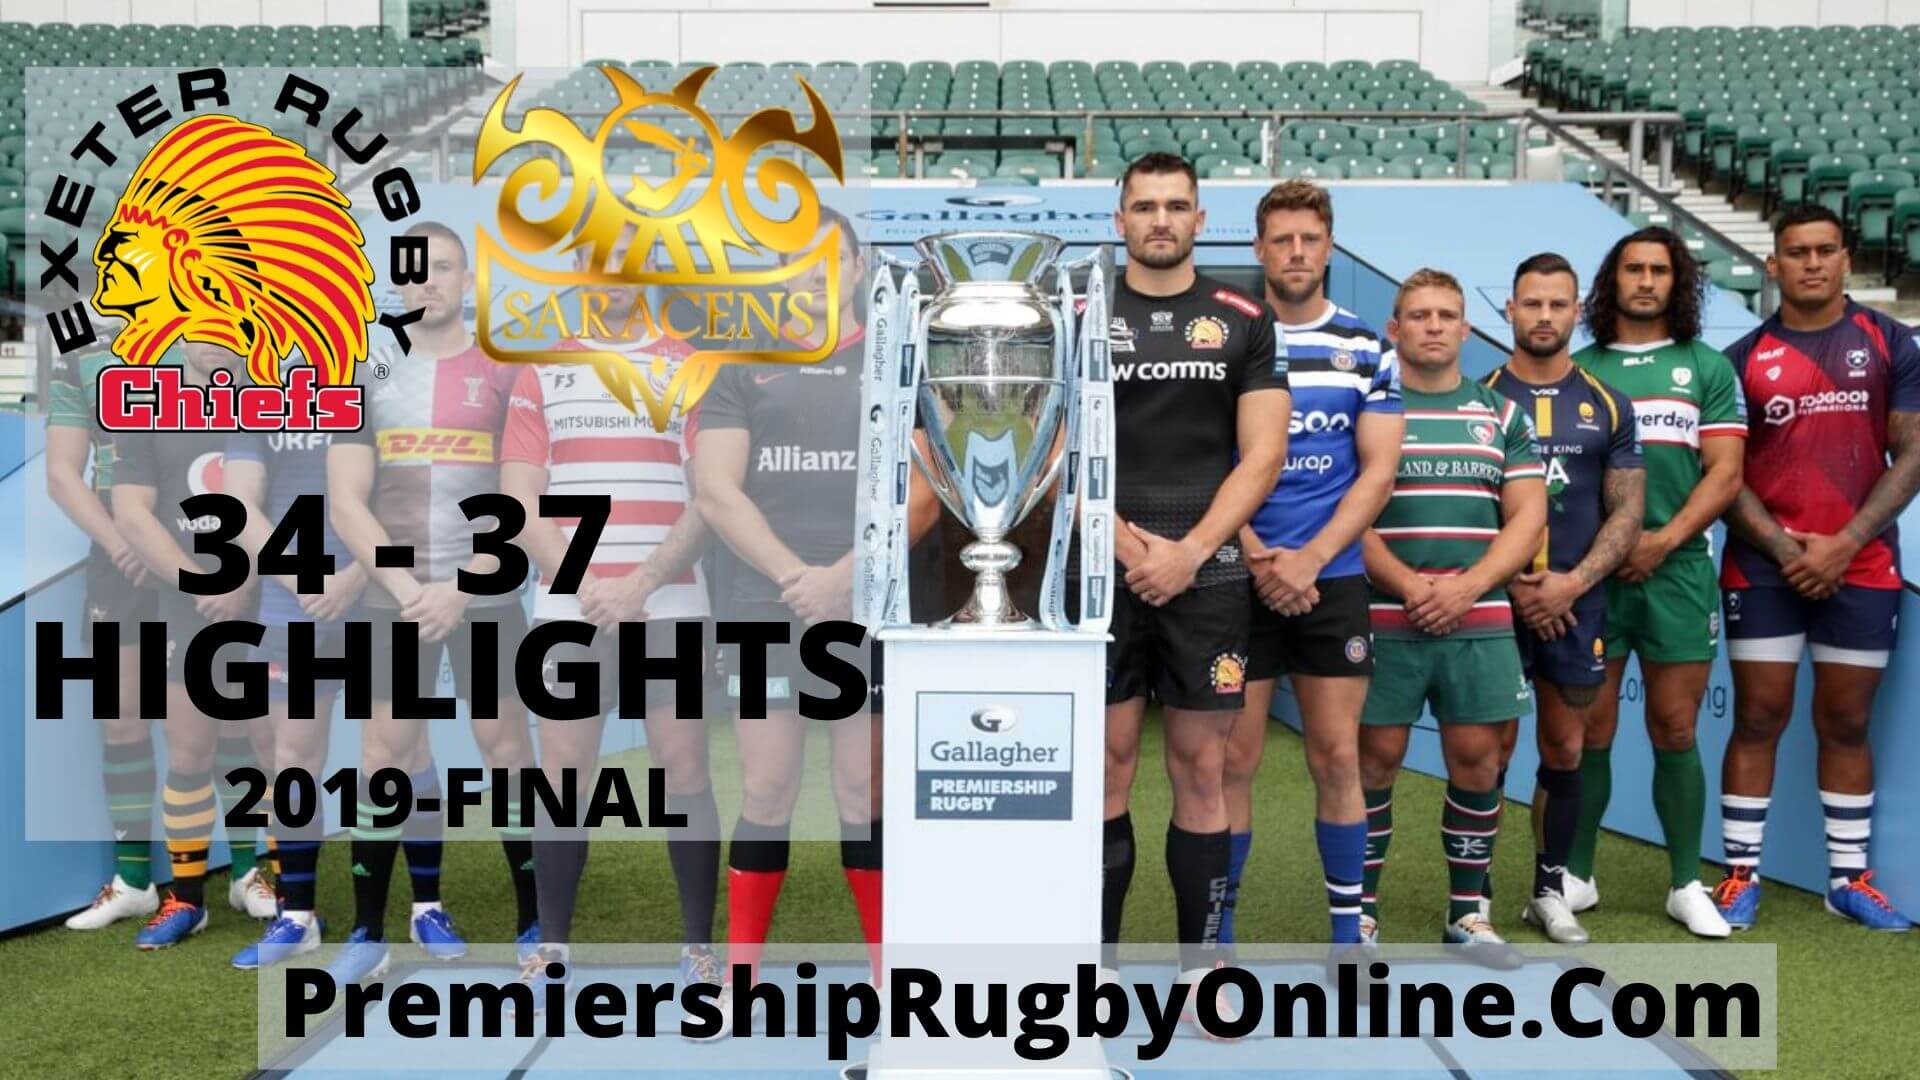 Exeter Chiefs vs Saracens Highlights 2019 Final